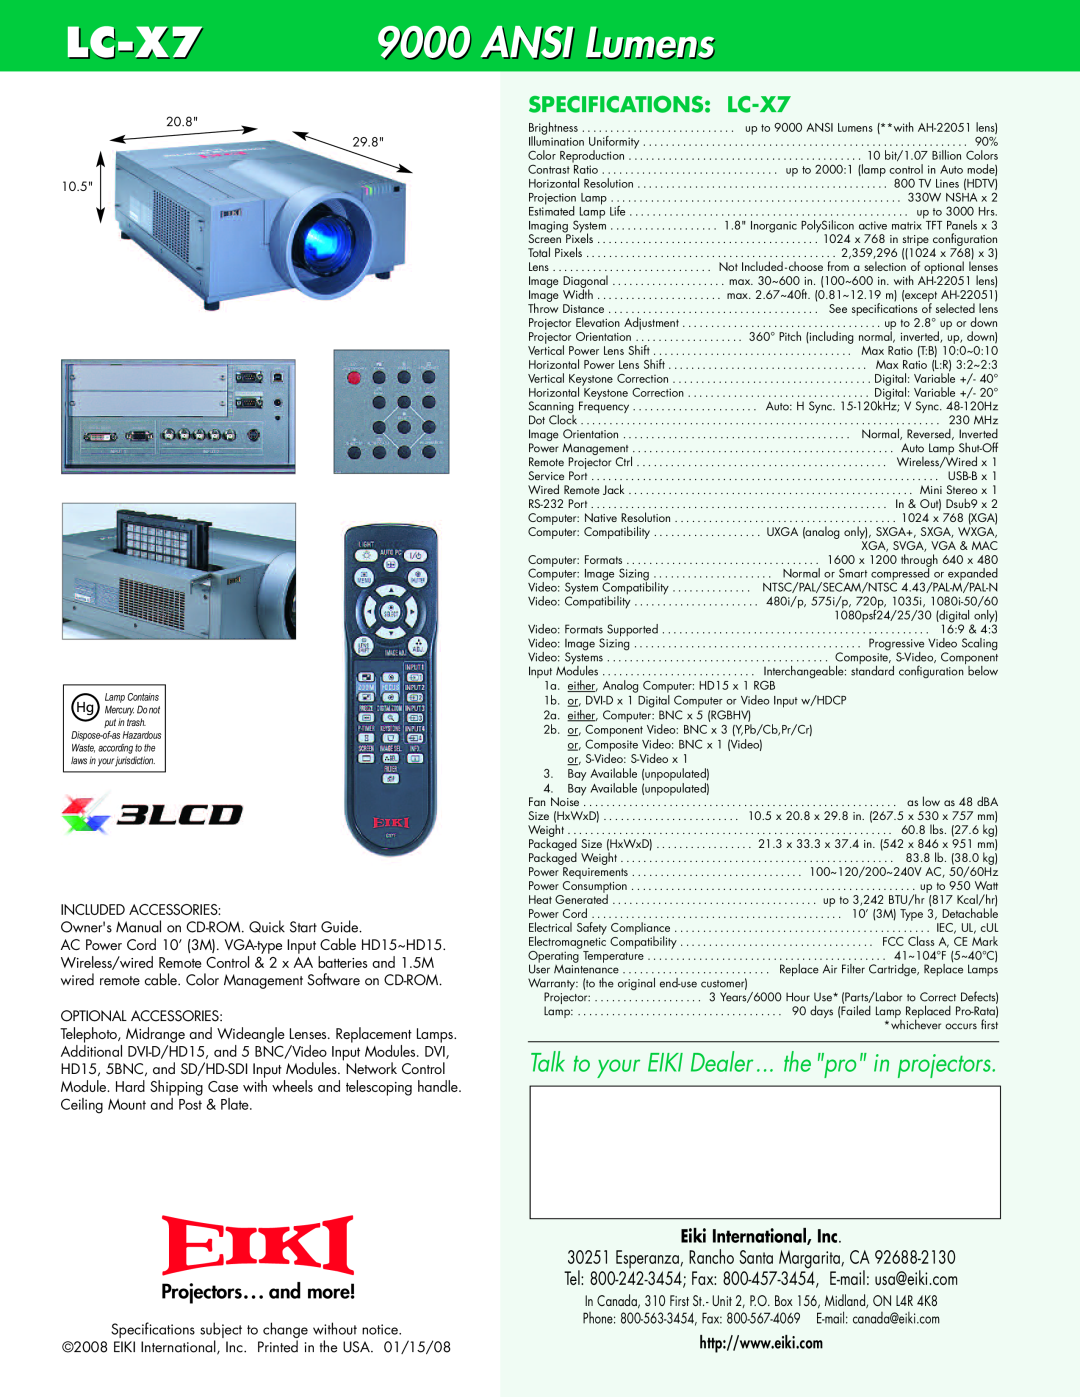 Eiki warranty 2345, ANSI Lumens, SPECIFICATIONS: LC-X7, Projectors... and more, Eiki International, Inc 